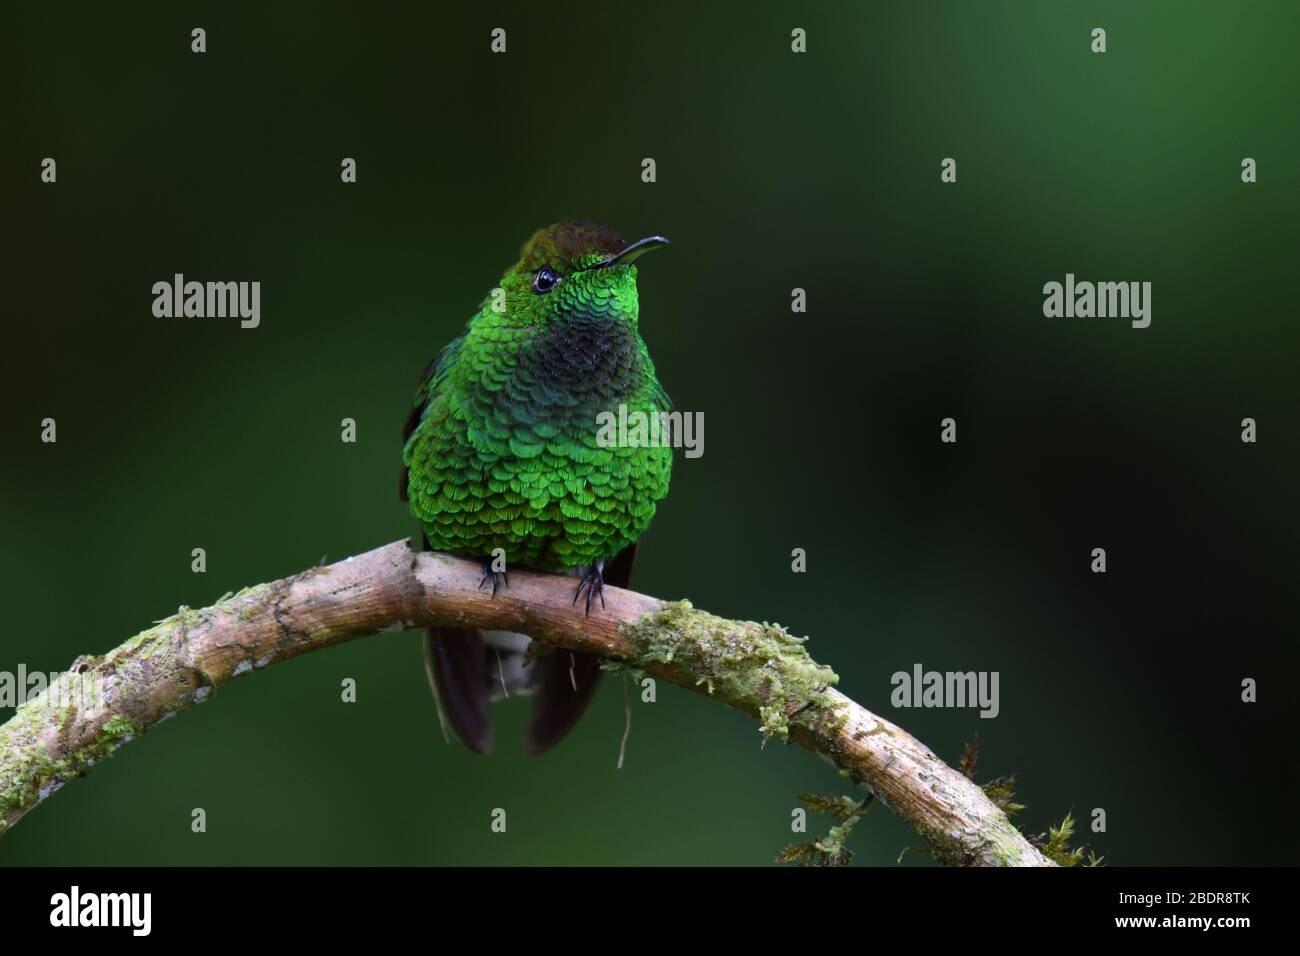 Stripe-tailed Hummingbird in Costa Rica cloud forest Stock Photo